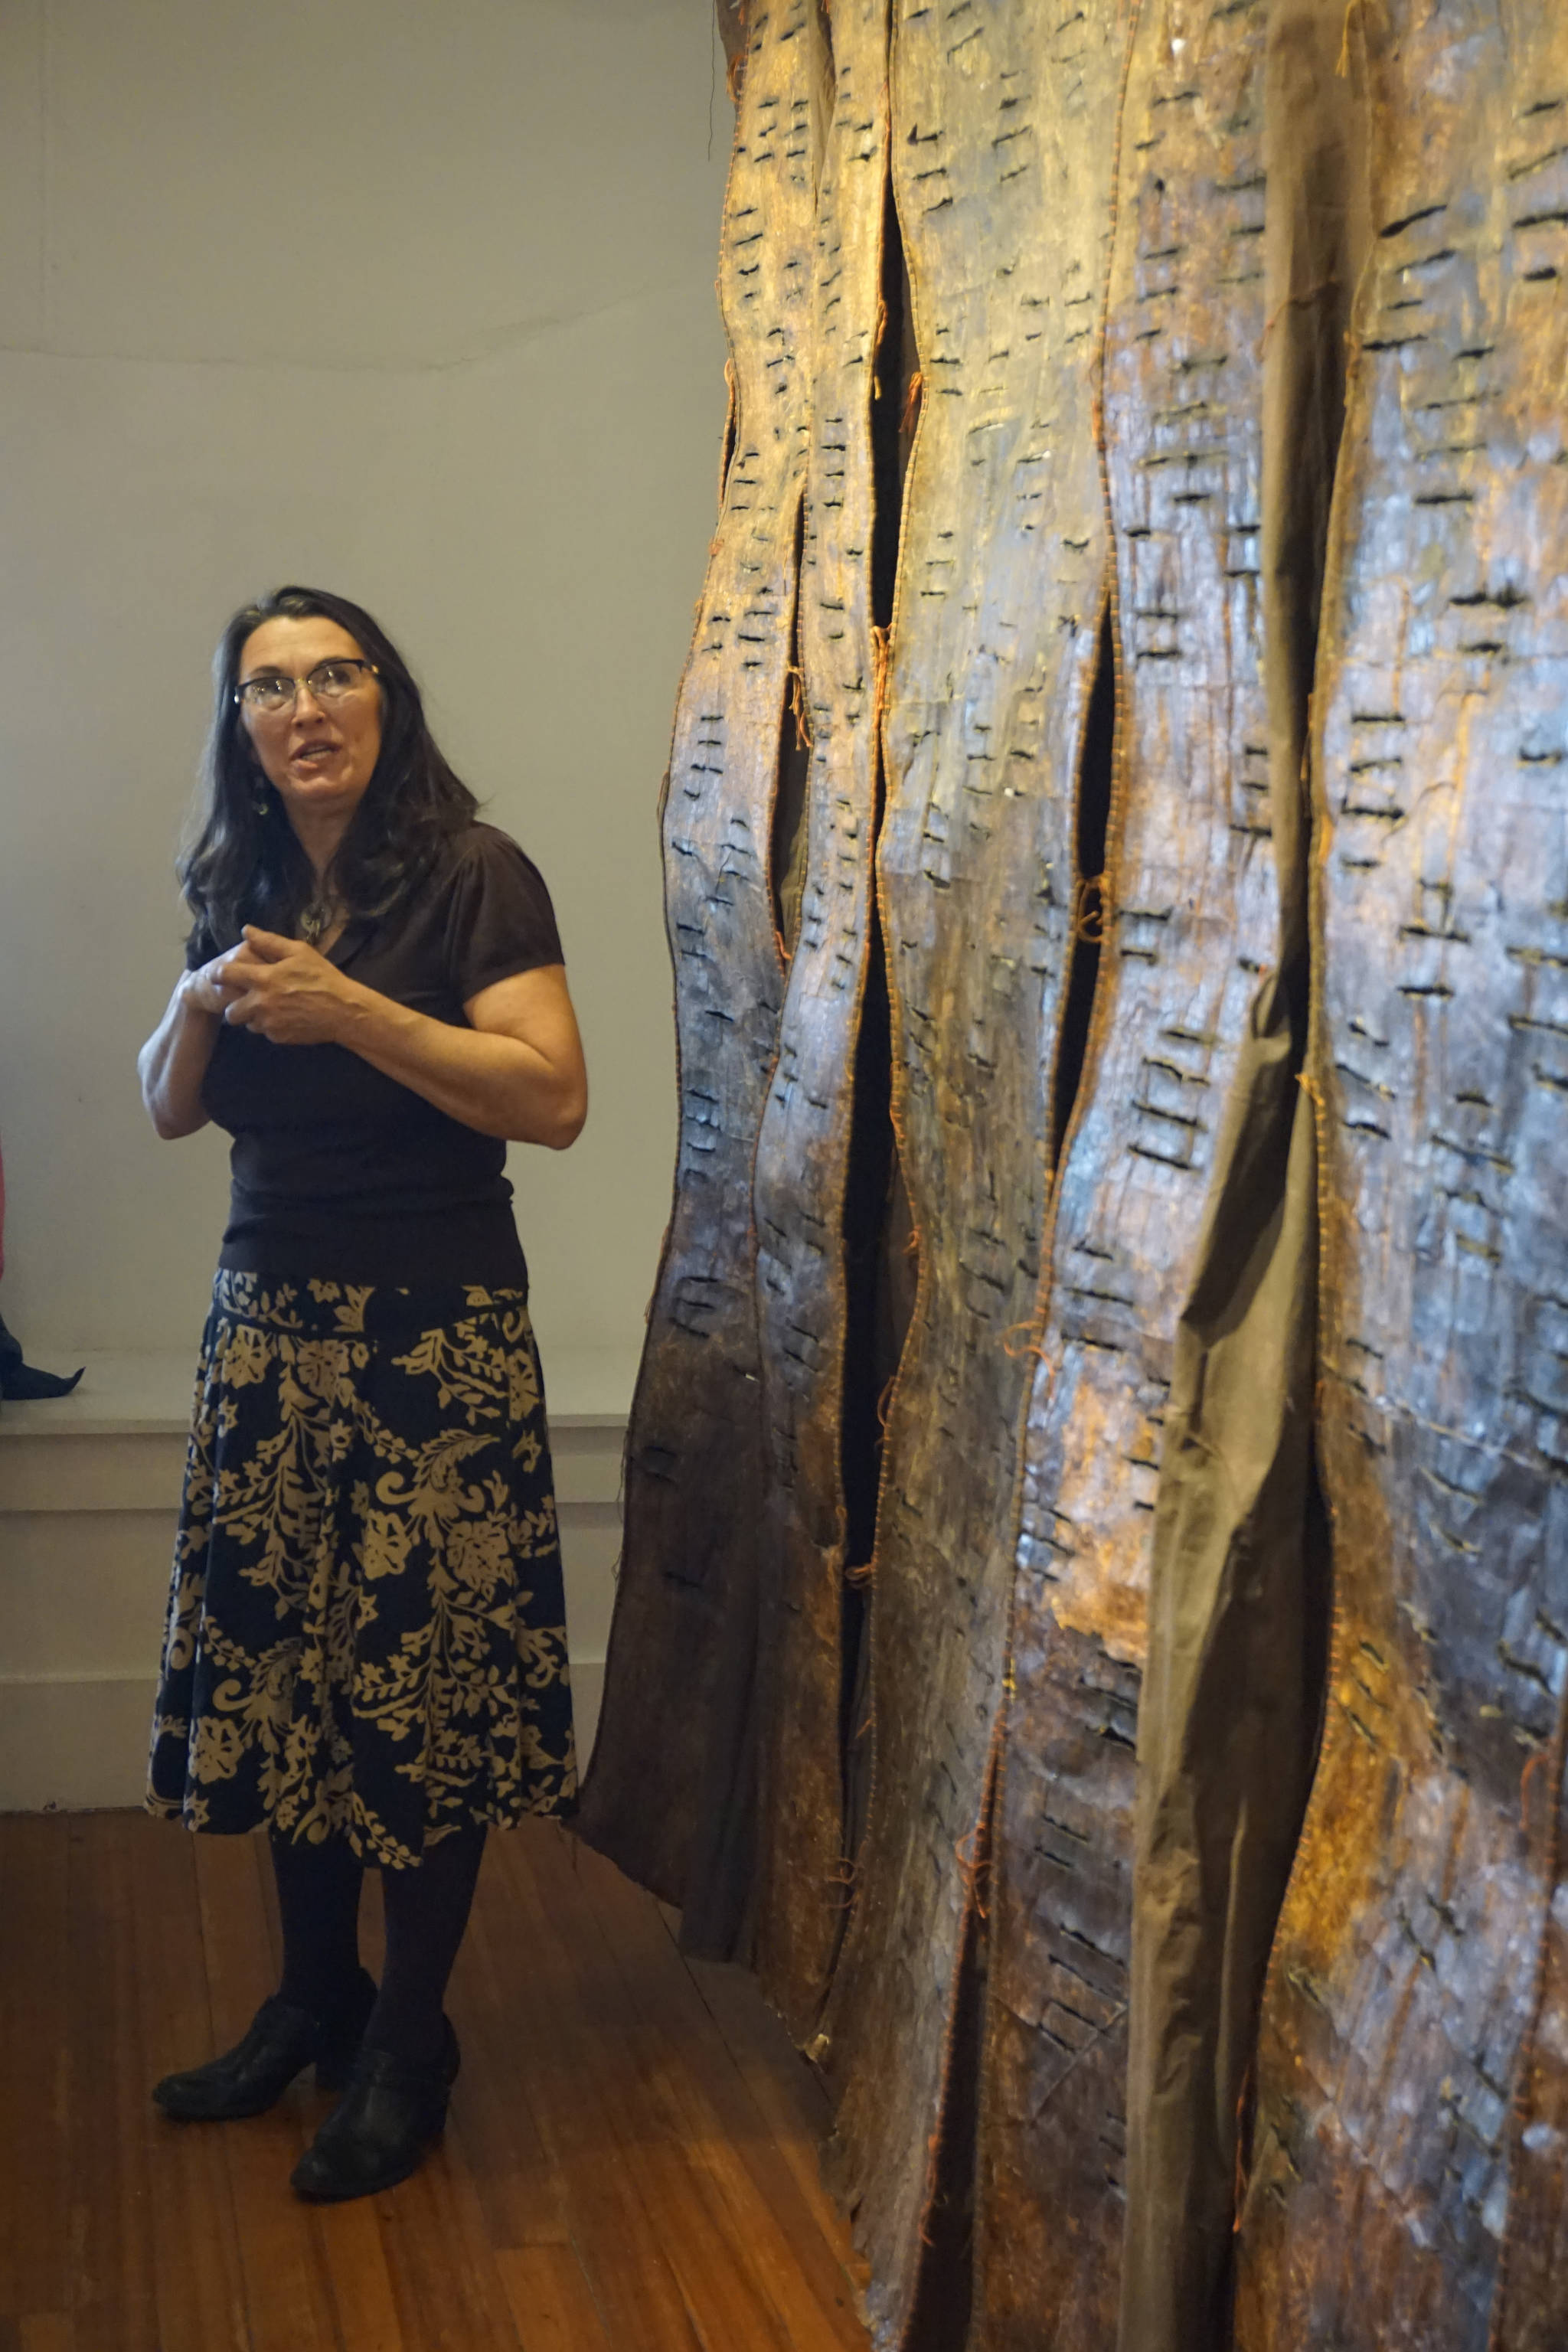 Keren Lowell speaks about her show at Bunnell Street Arts Center for its First Friday, Oct. 6, 2018, opening in Homer, Alaska. (Photo by Michael Armstrong/Homer News)